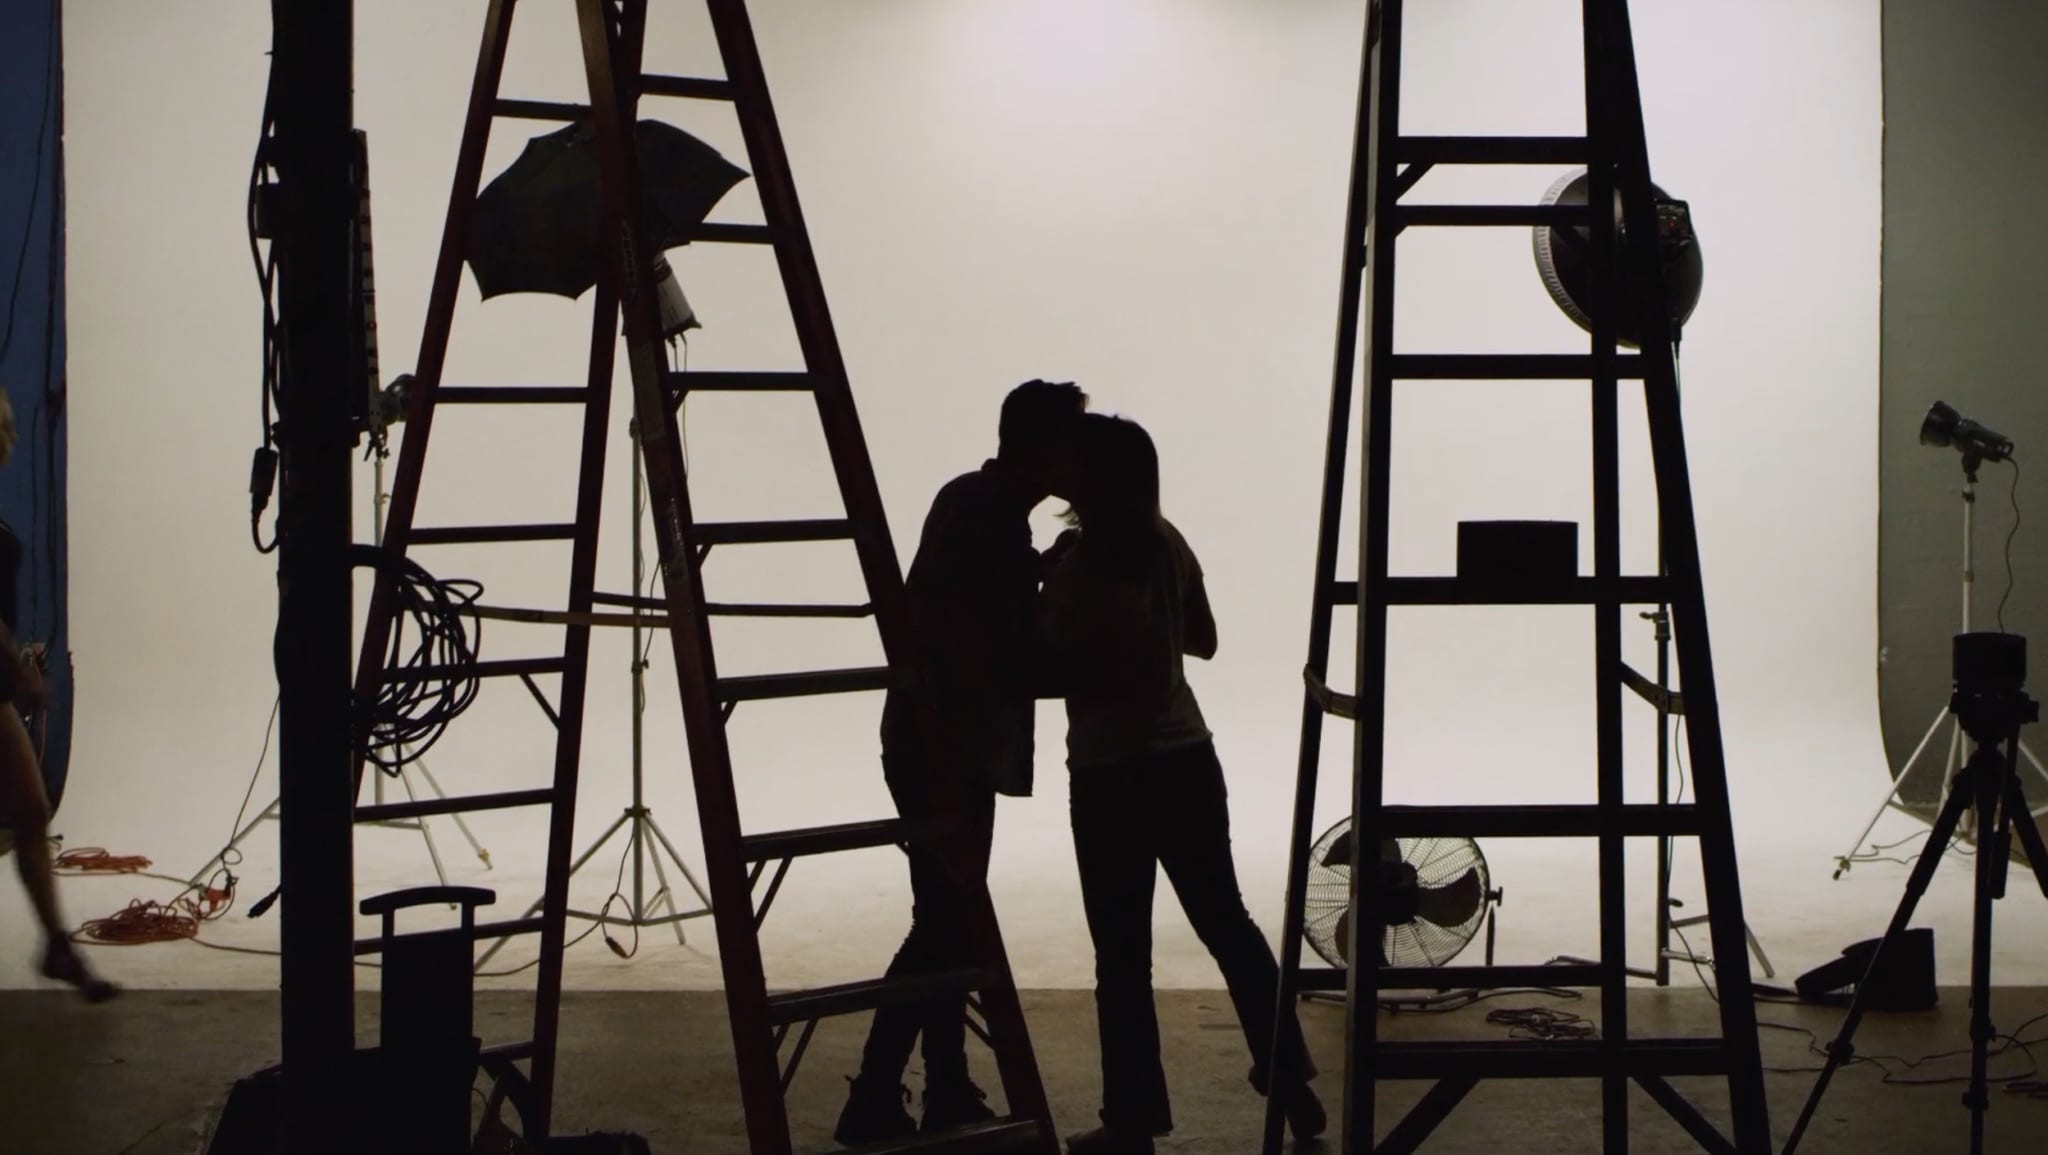 Two lovers backstage kissing among stage equipment